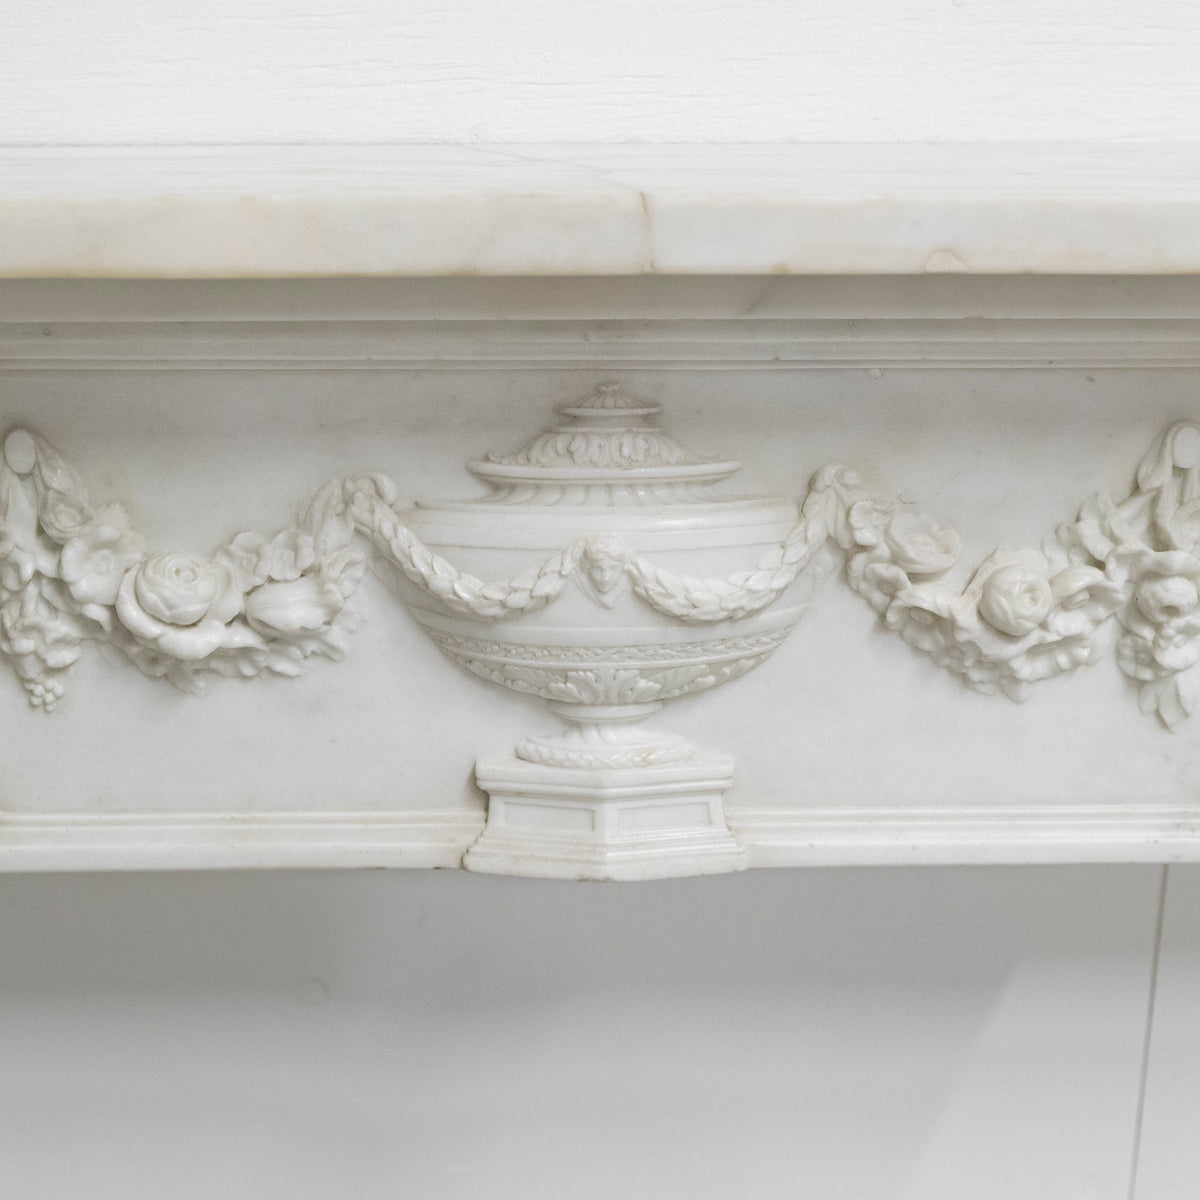 Antique Regency Statuary Marble Fireplace Surround | The Architectural Forum